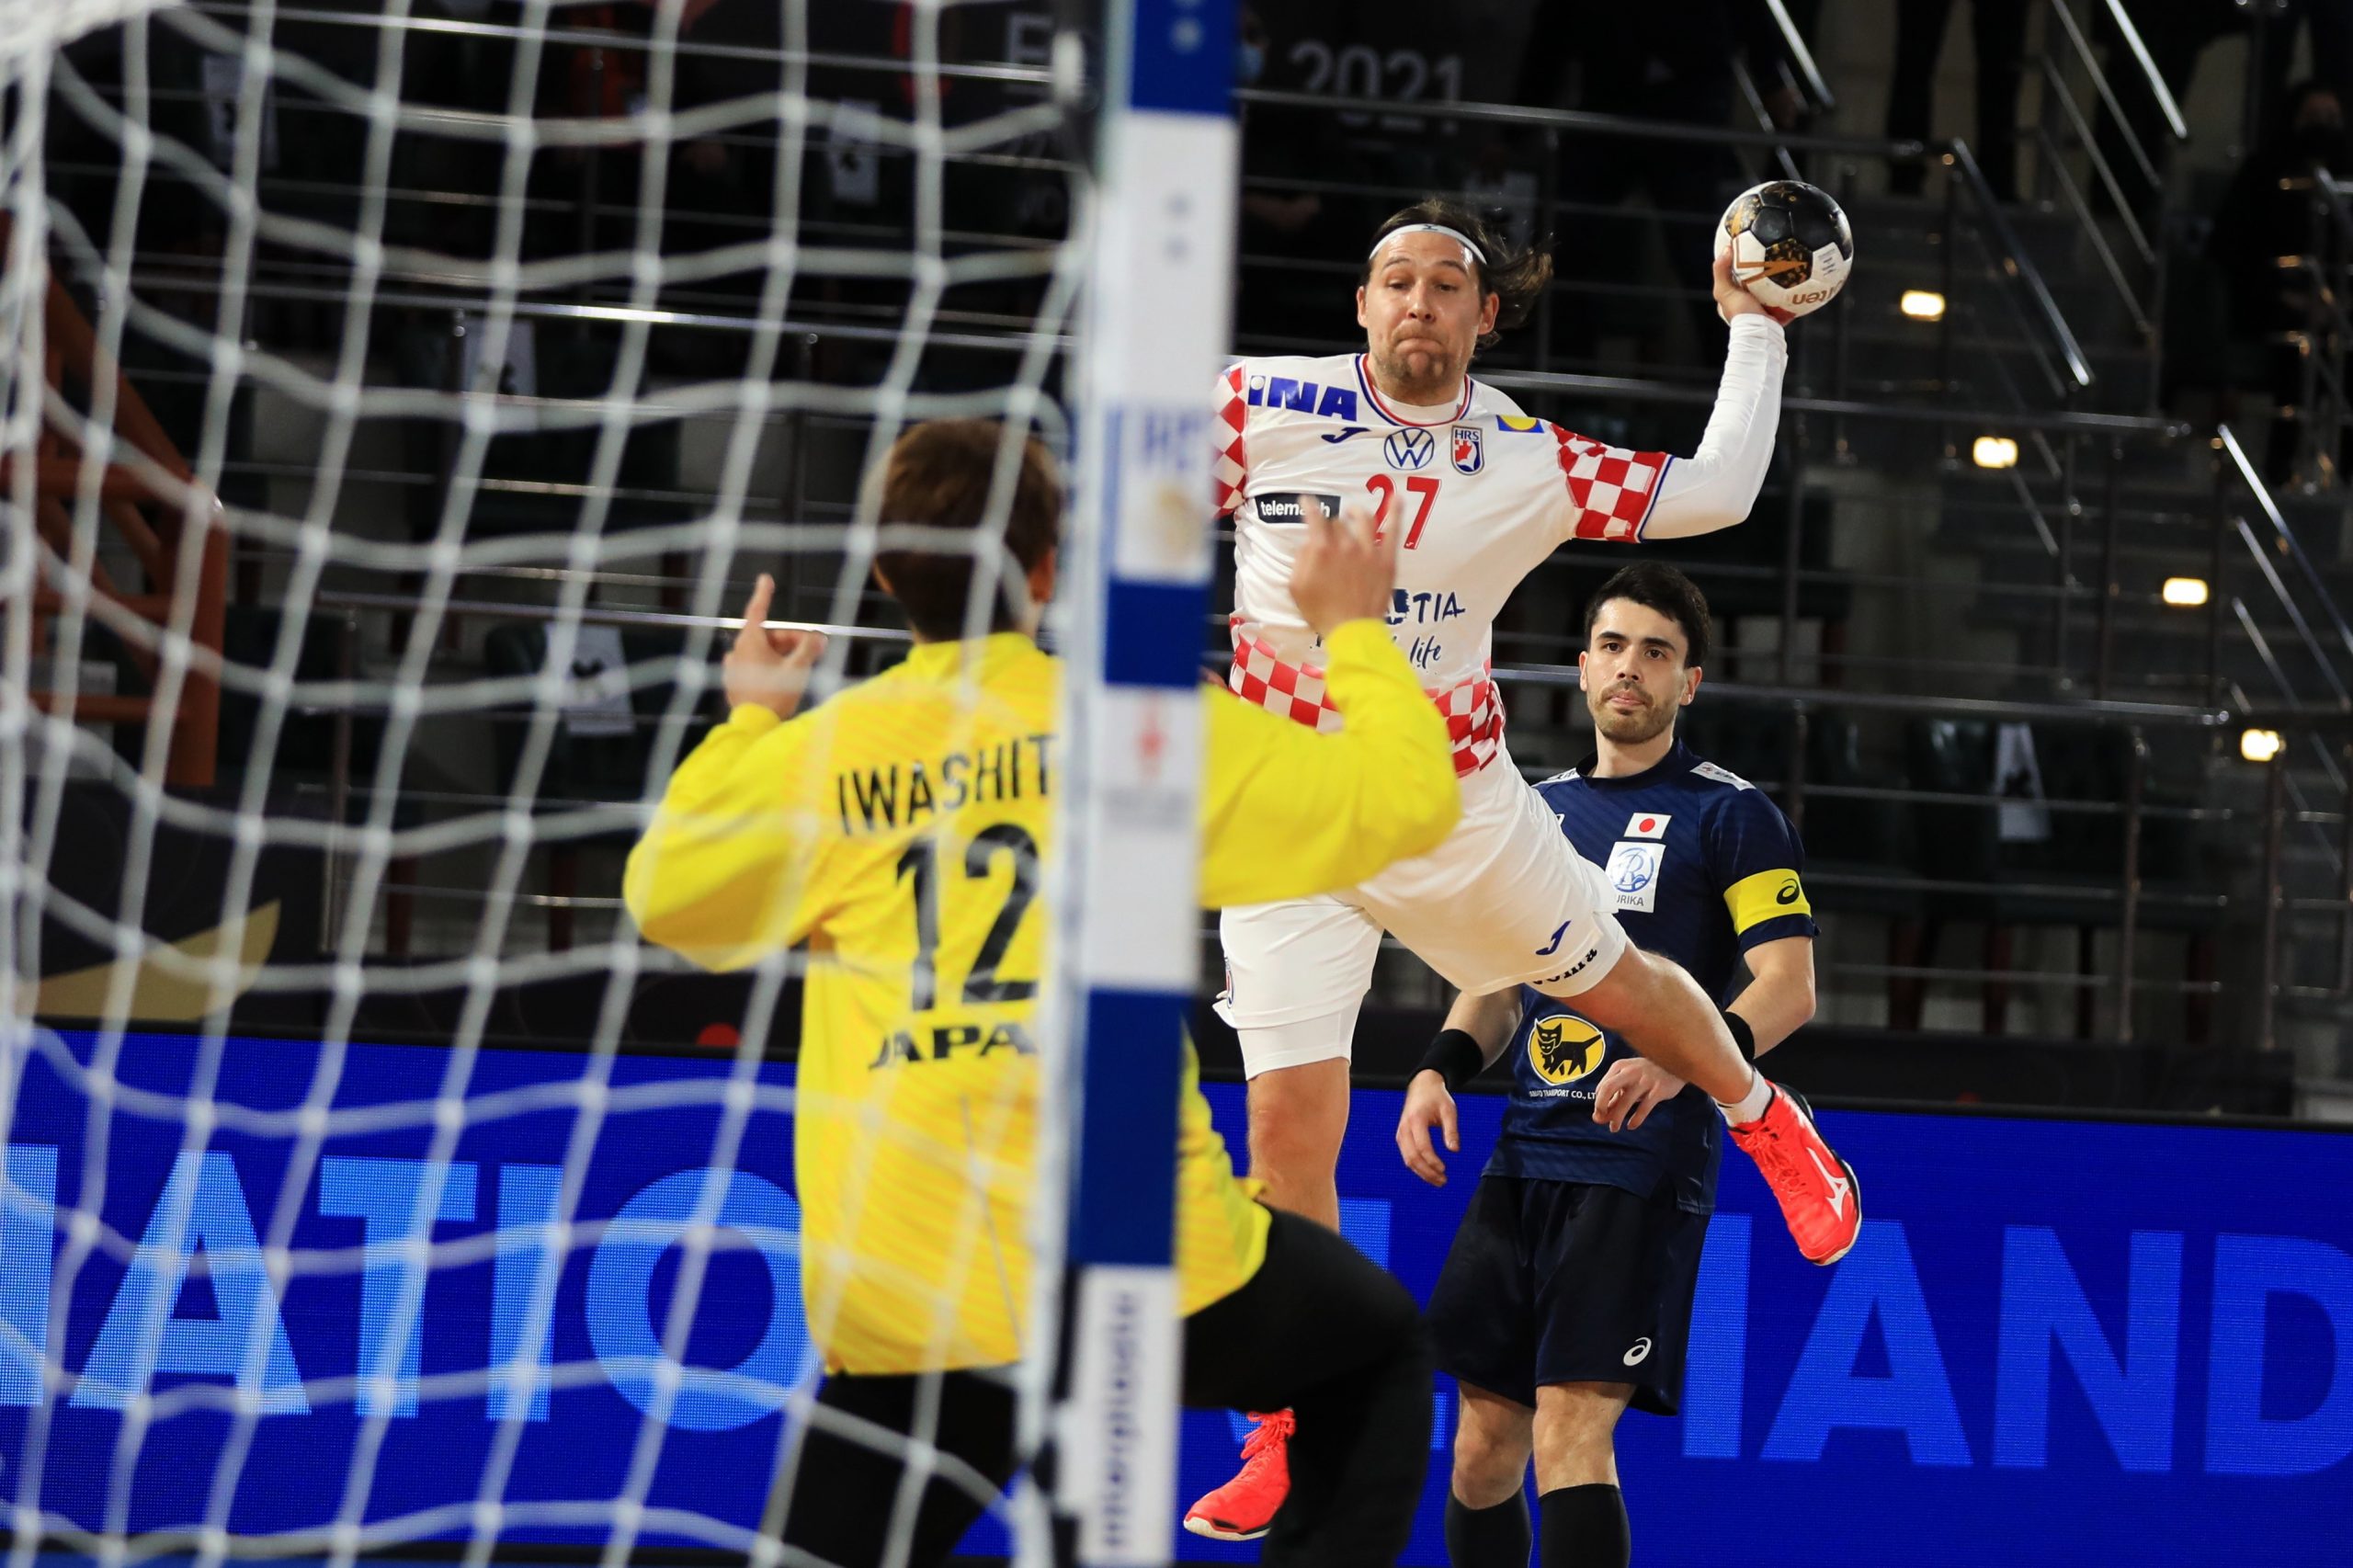 epa08939727 A handout photo made available by Egypt Handabll 2021 of Ivan Cupic of Croatia attempt to score against goalkeeper Yuta Iwashita of Japan during the match between Croatia and Japan at the 27th Men's Handball World Championship in Alexandria, Egypt, 15 January 2021.  EPA/Hazem Gouda / Egypt Handball 2021 HANDOUT  SHUTTERSTOCK OUT HANDOUT EDITORIAL USE ONLY/NO SALES